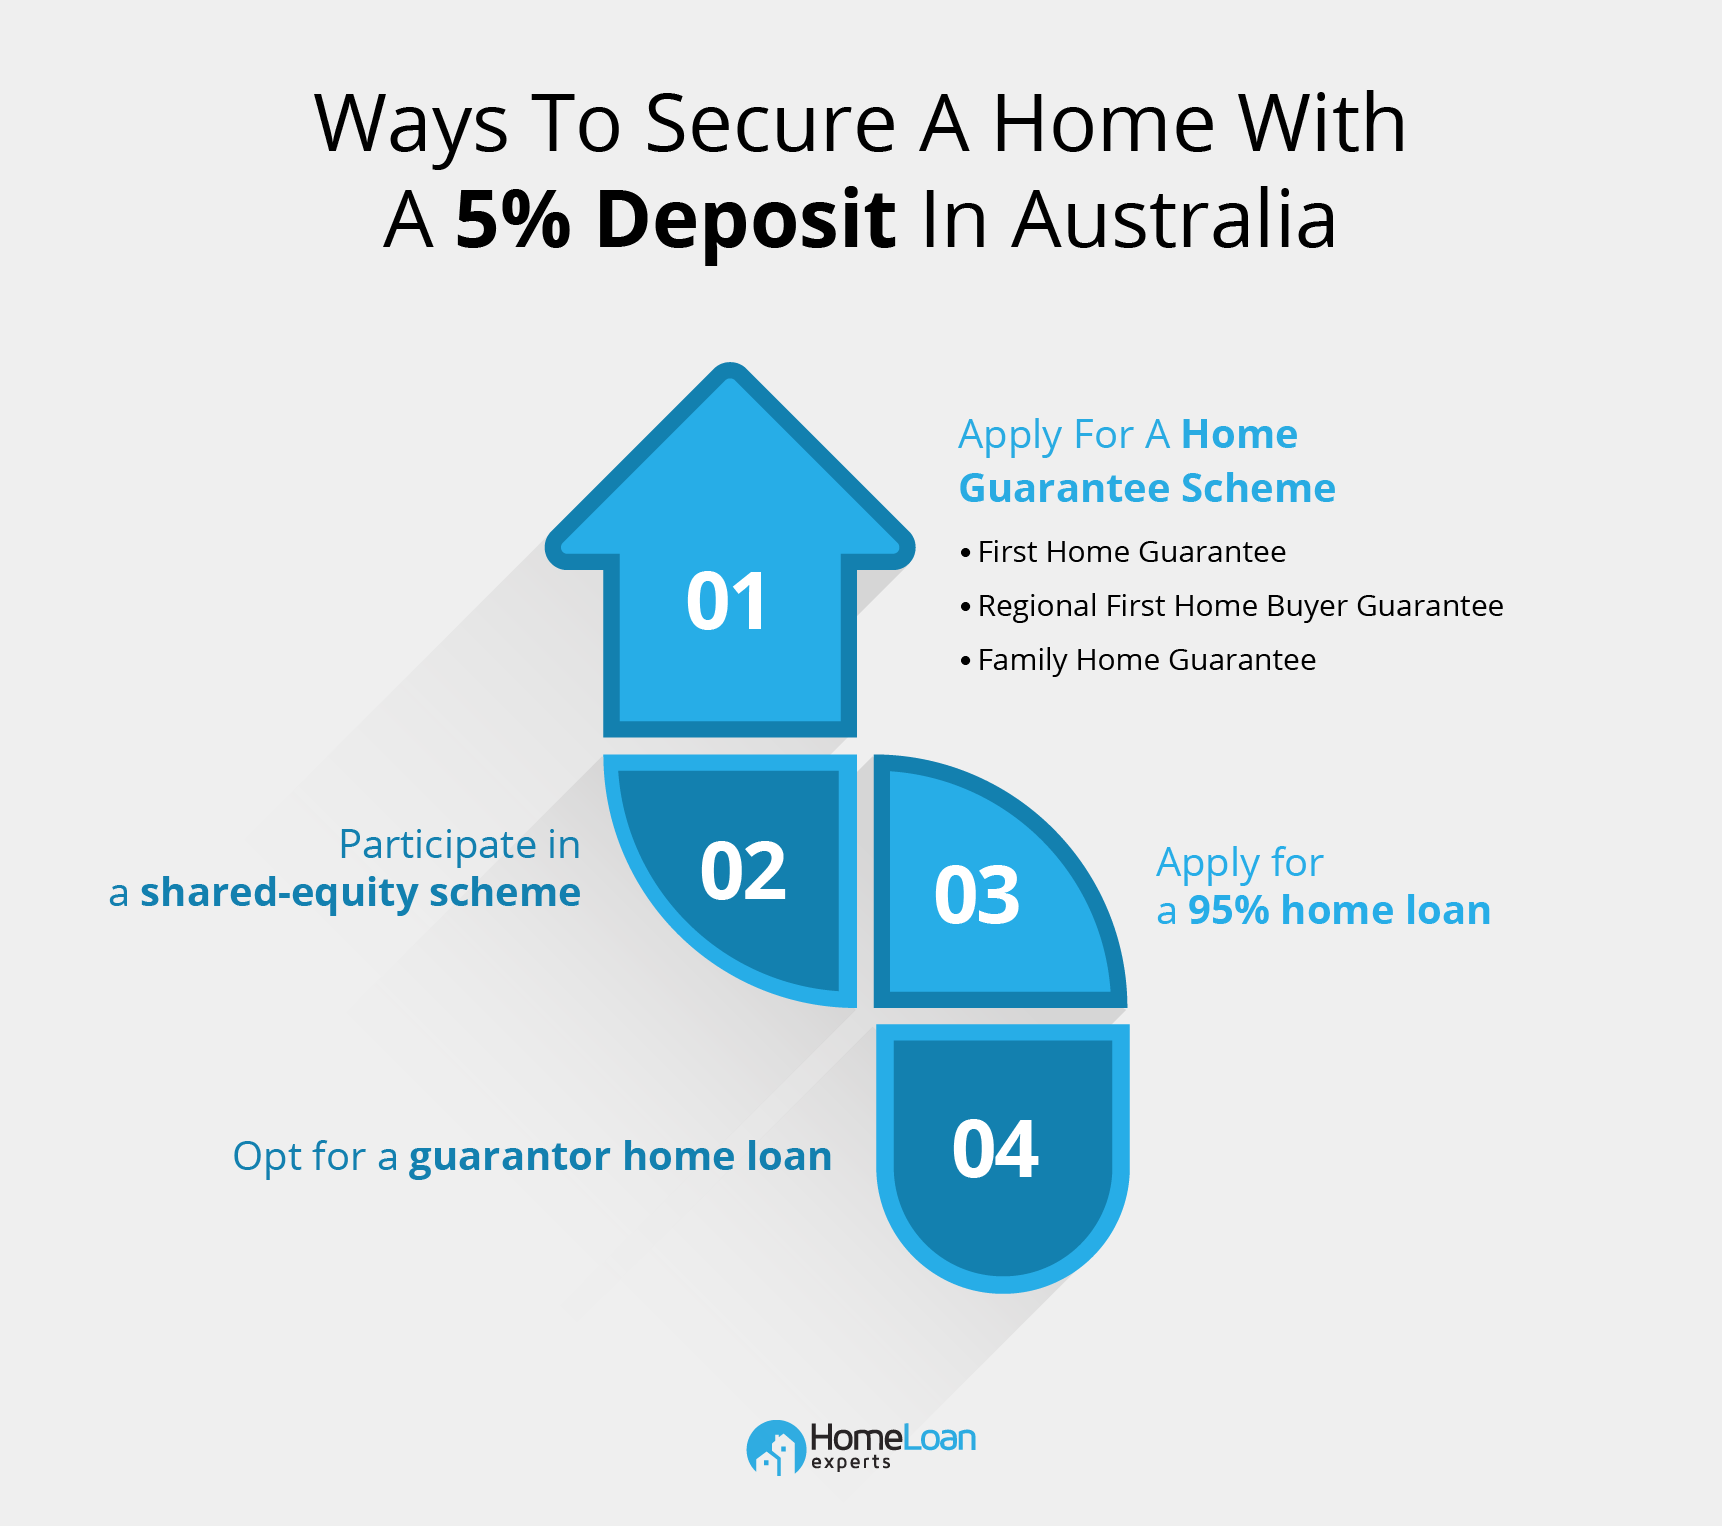 An infographic showing four ways to secure a home in Australia with a 5% deposit.